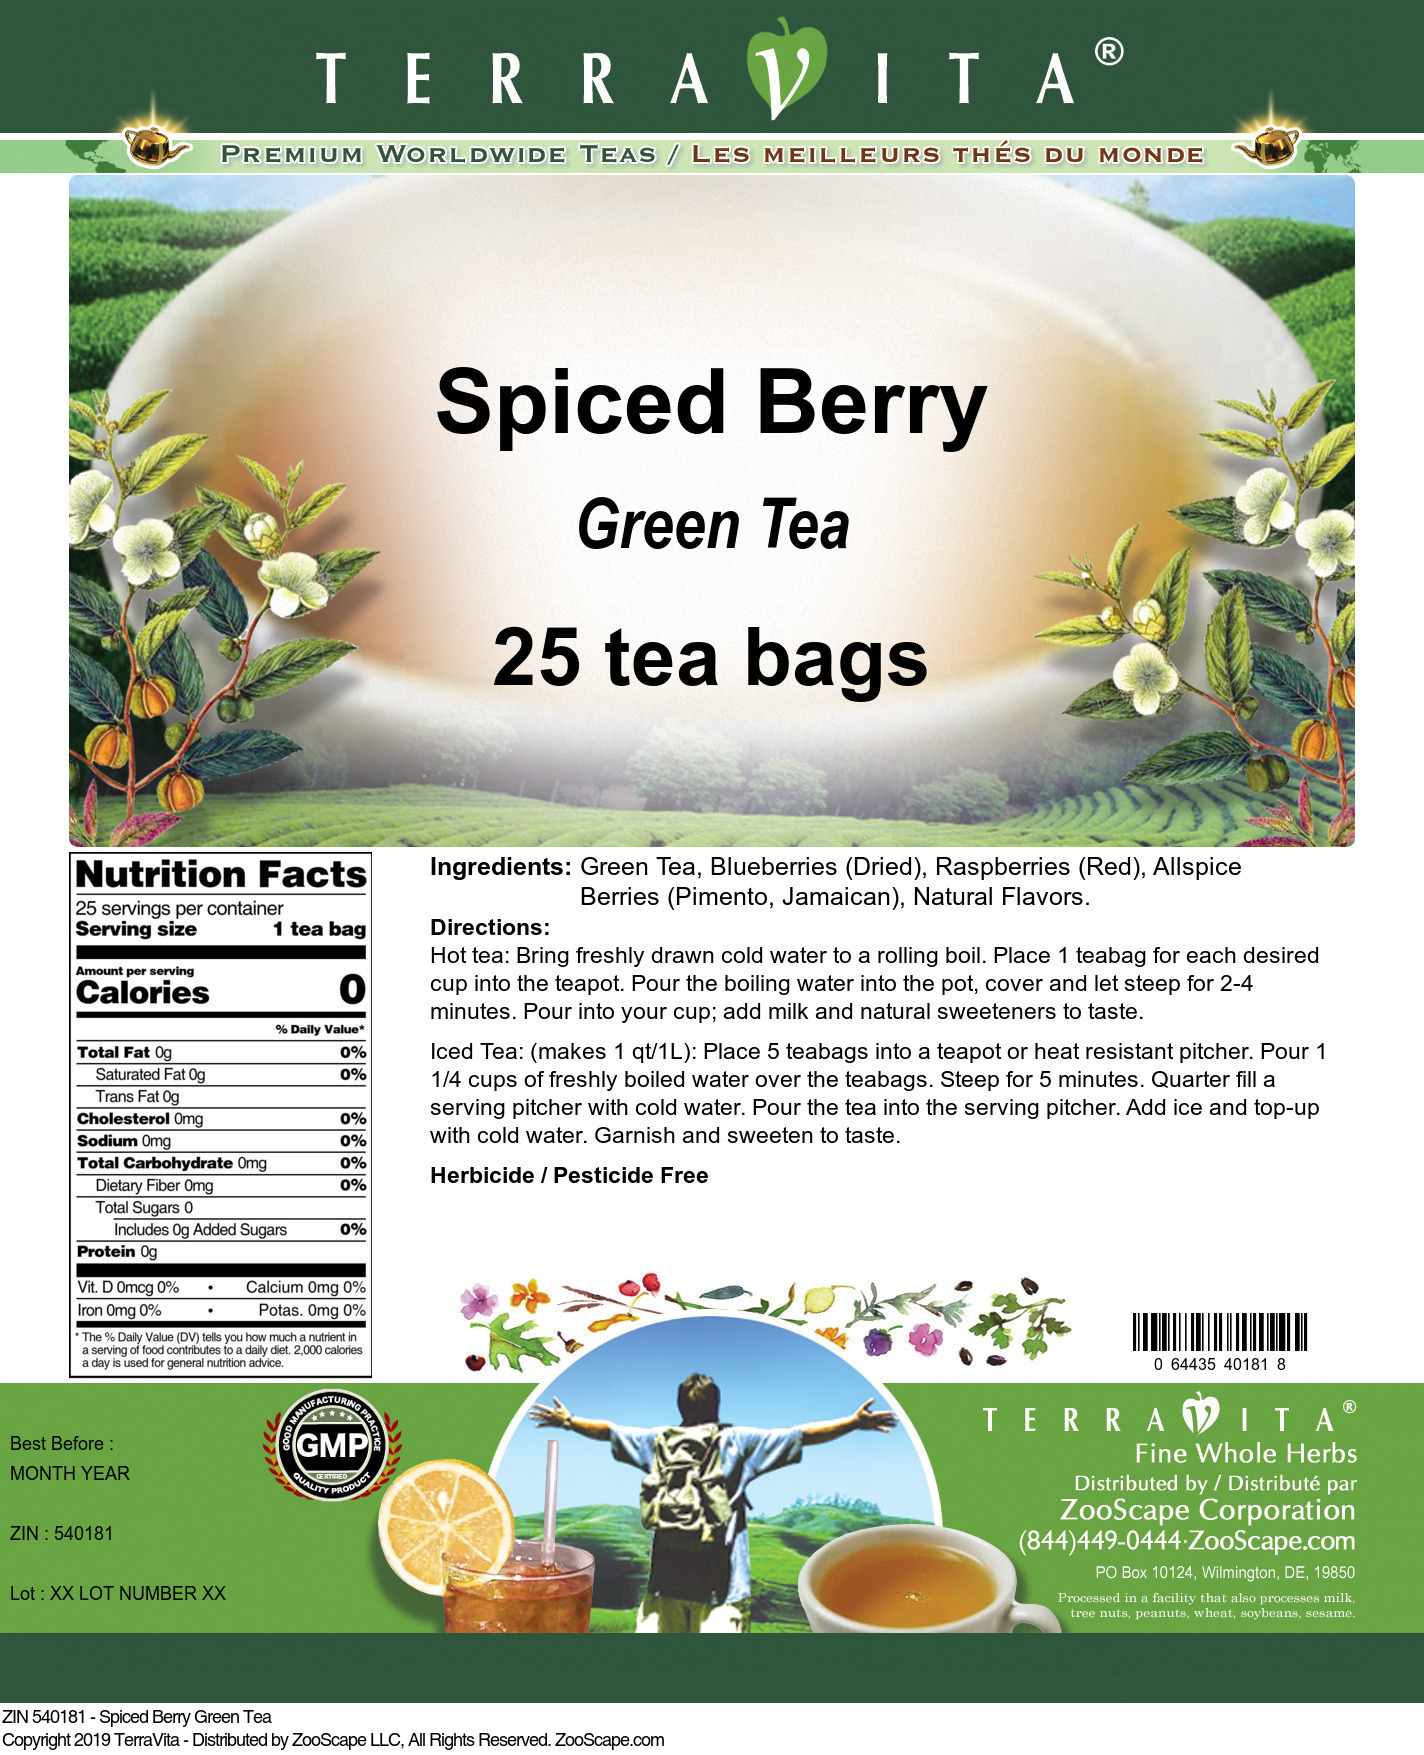 Spiced Berry Green Tea - Label